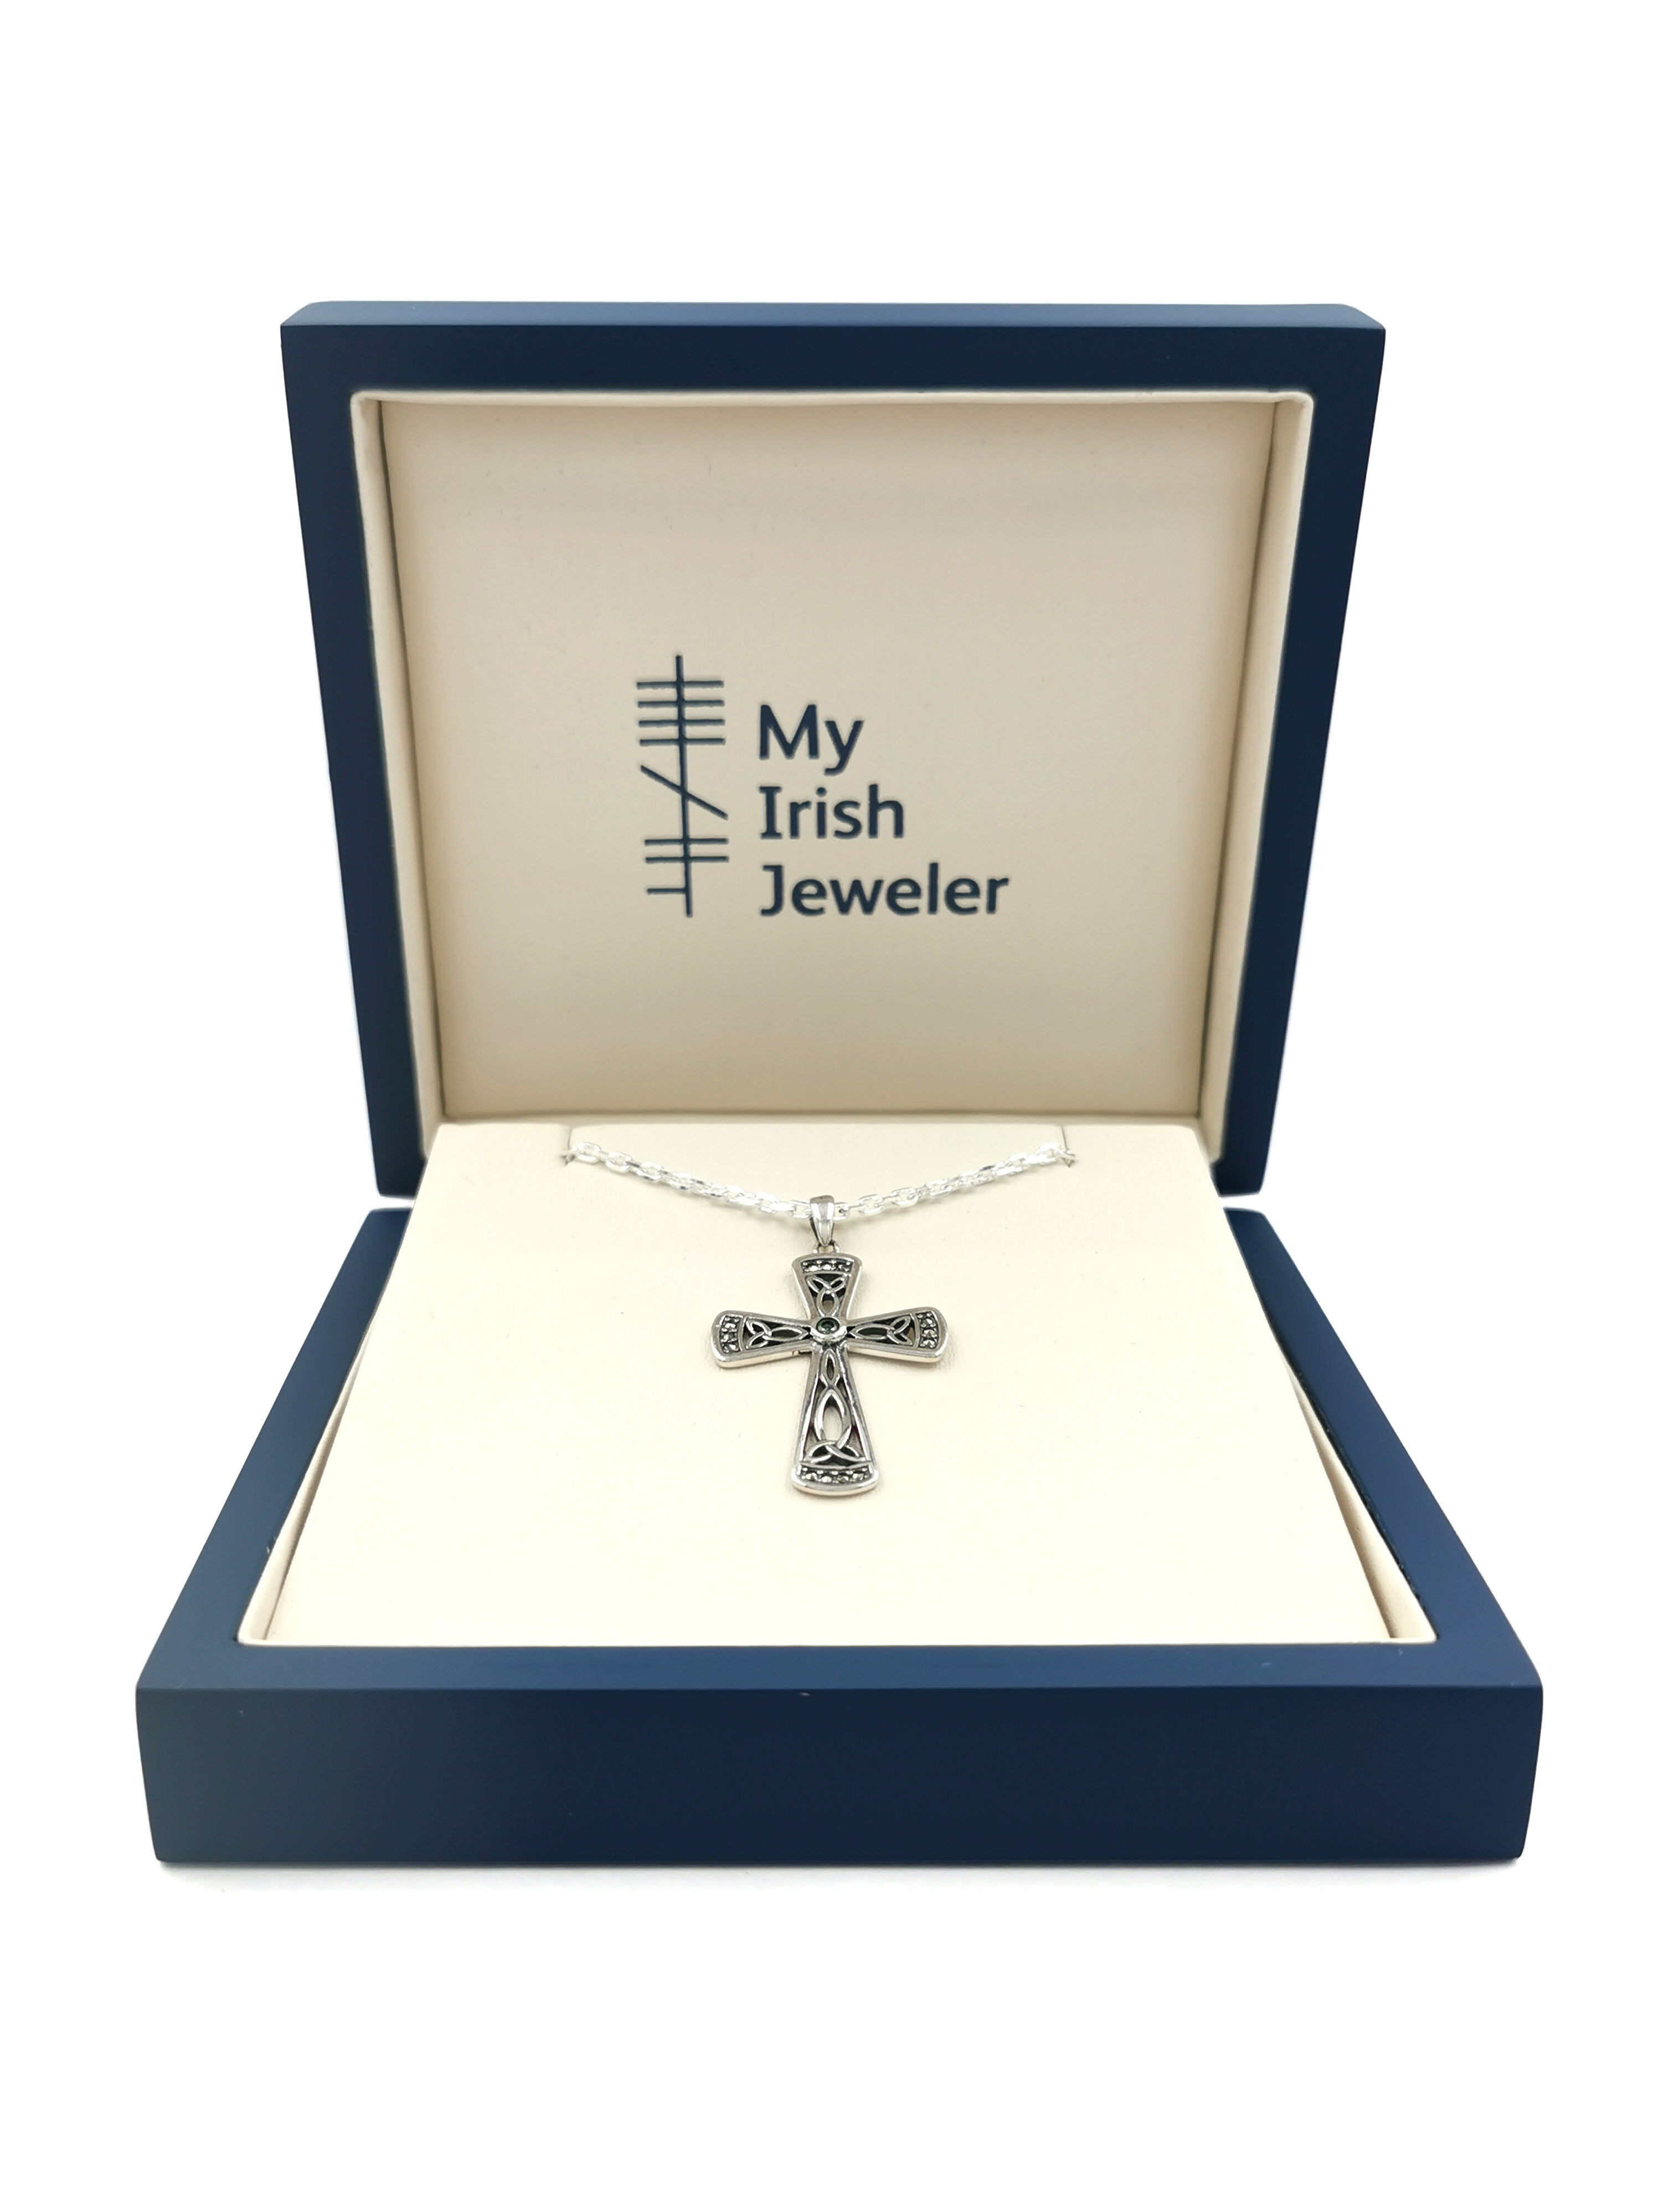 US Jewels And Gems 0.925 Sterling Silver Simulated Imitation Emerald Irish Celtic Cross Pendant Necklace 